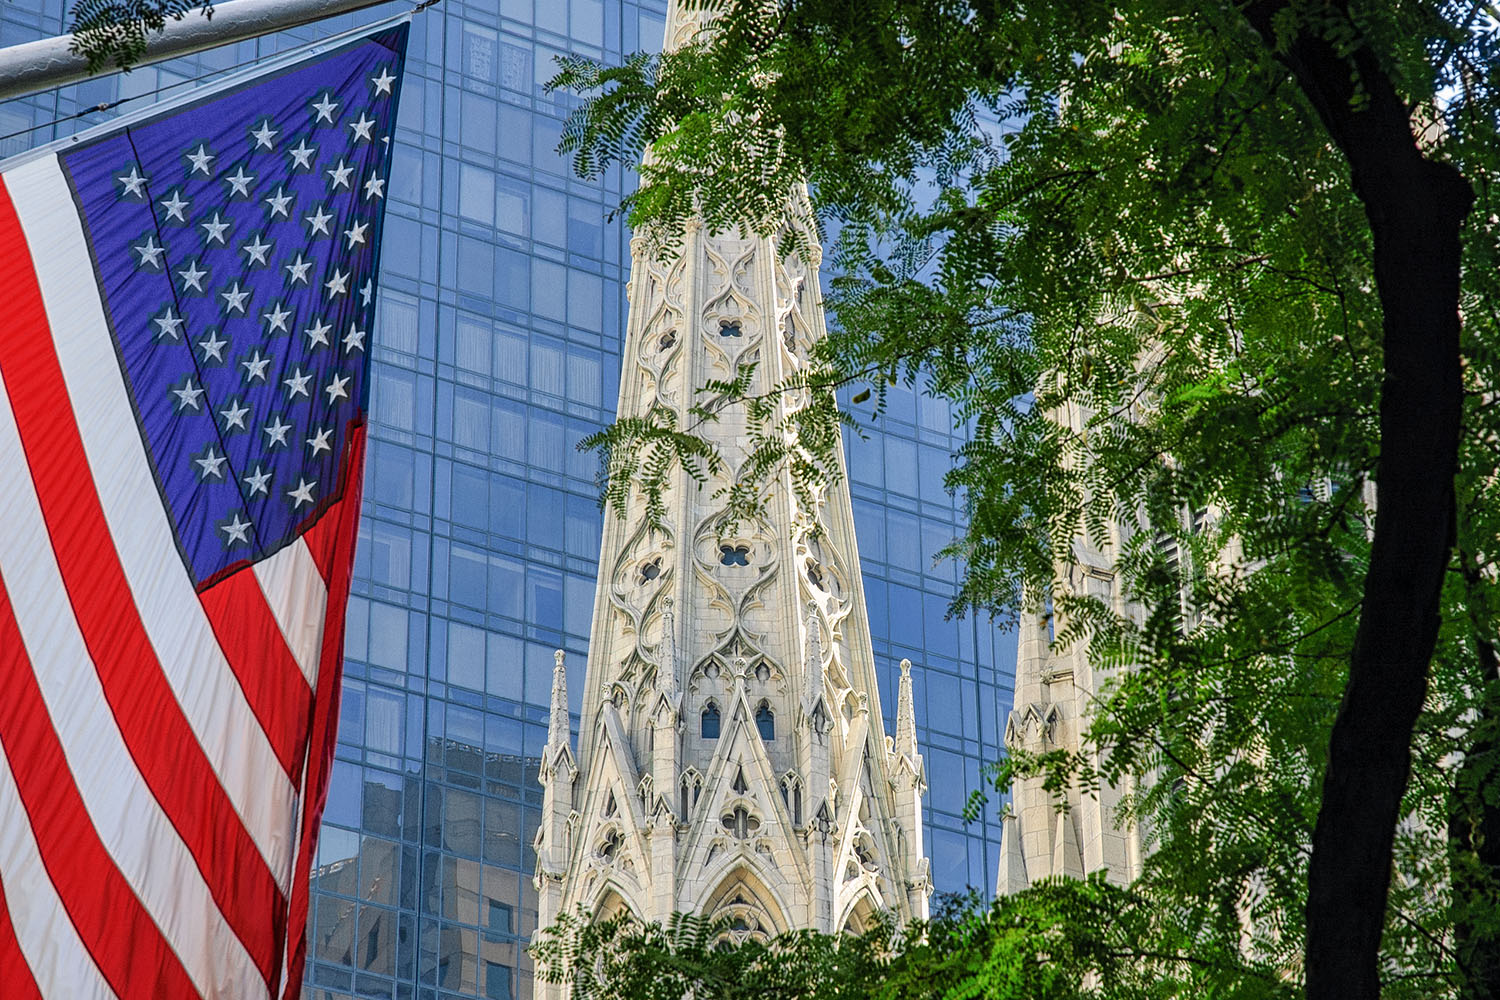 The spires of St. Patrick's Cathedral